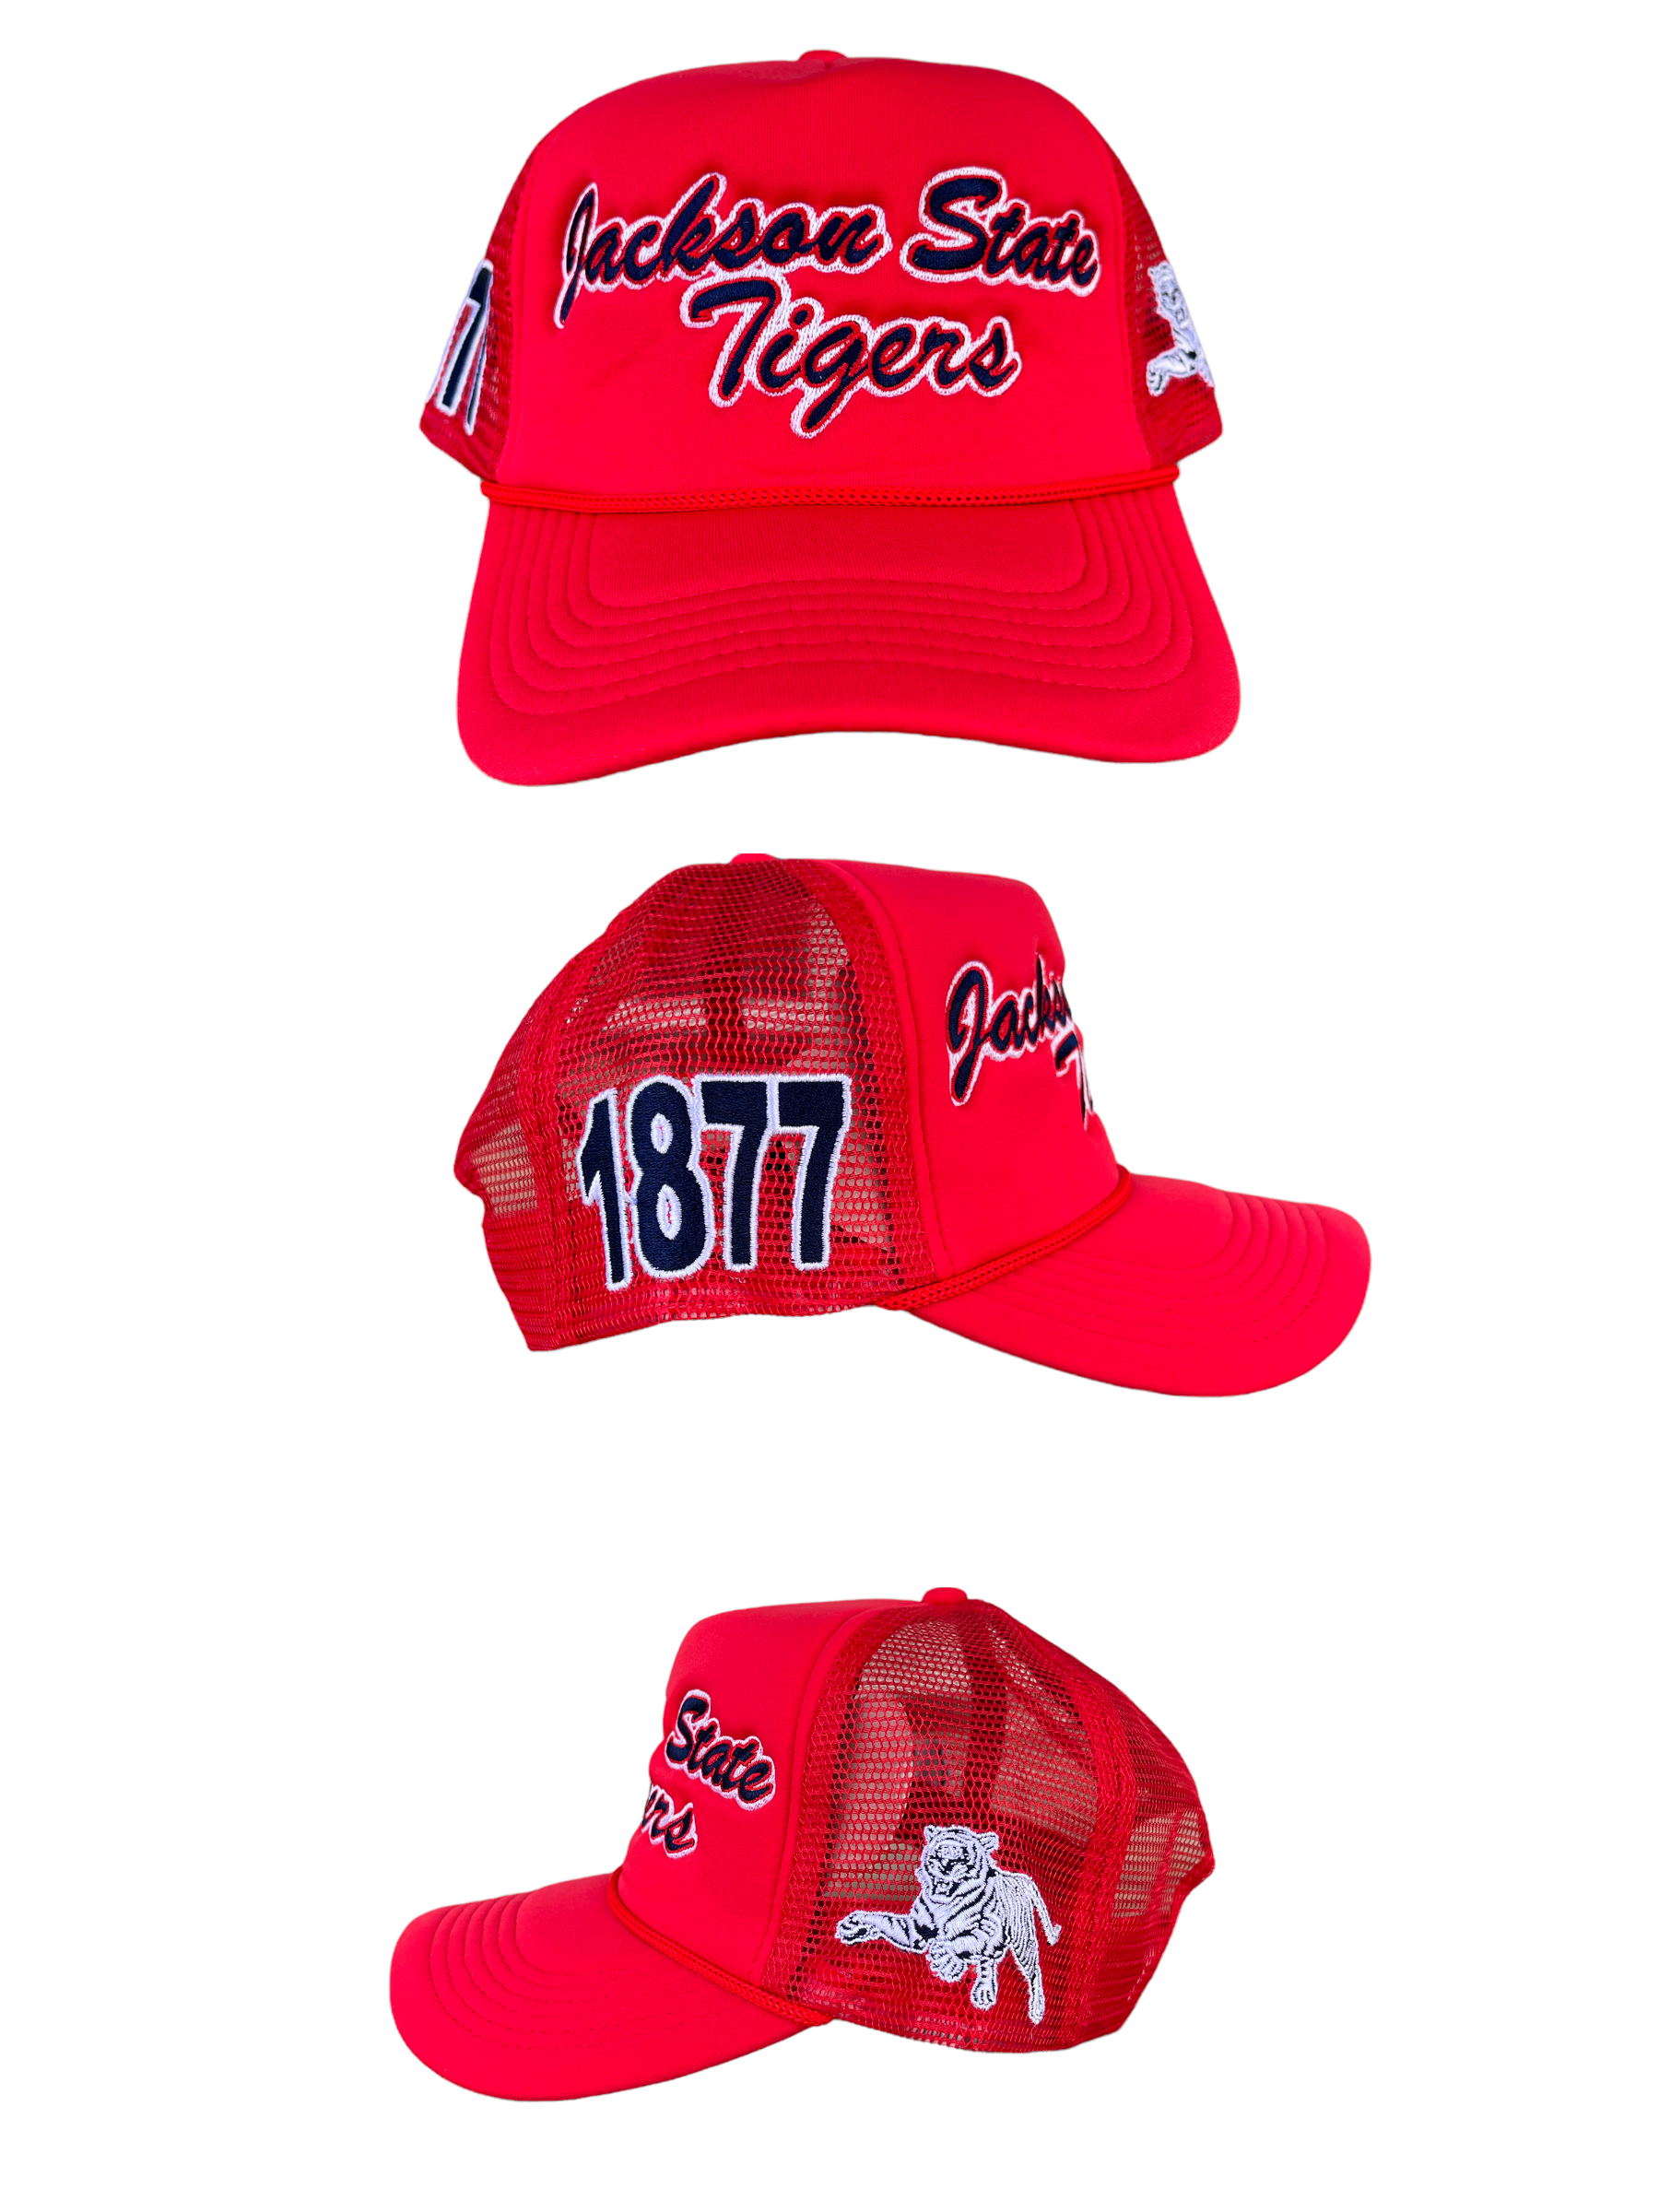 tigers red hat